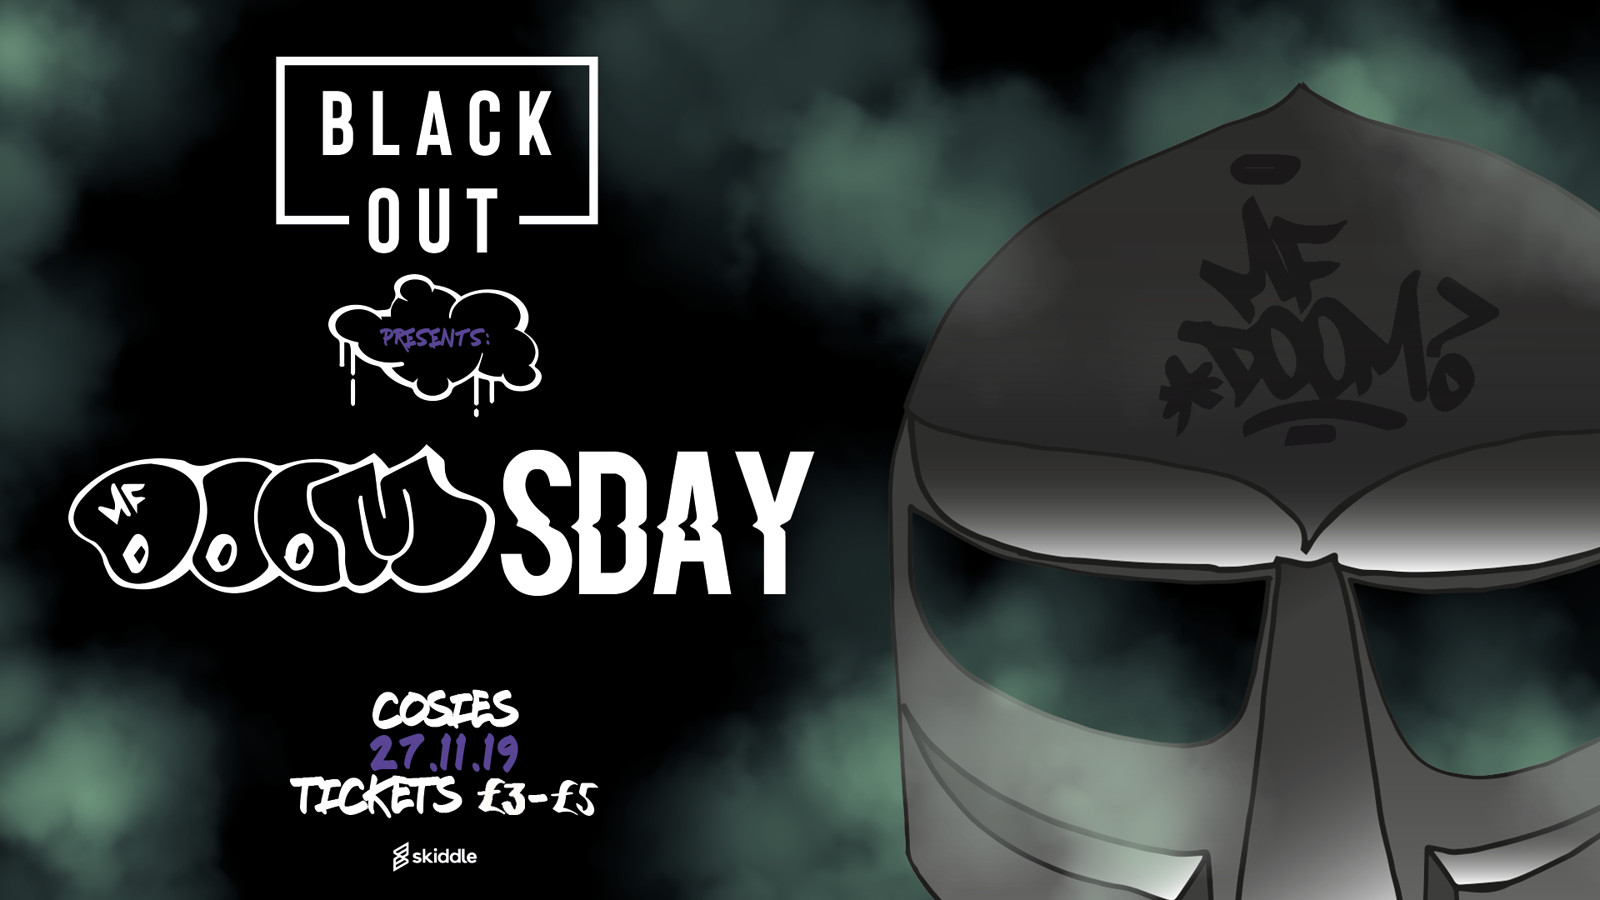 Blackout Presents: MF DOOMsday at Cosies